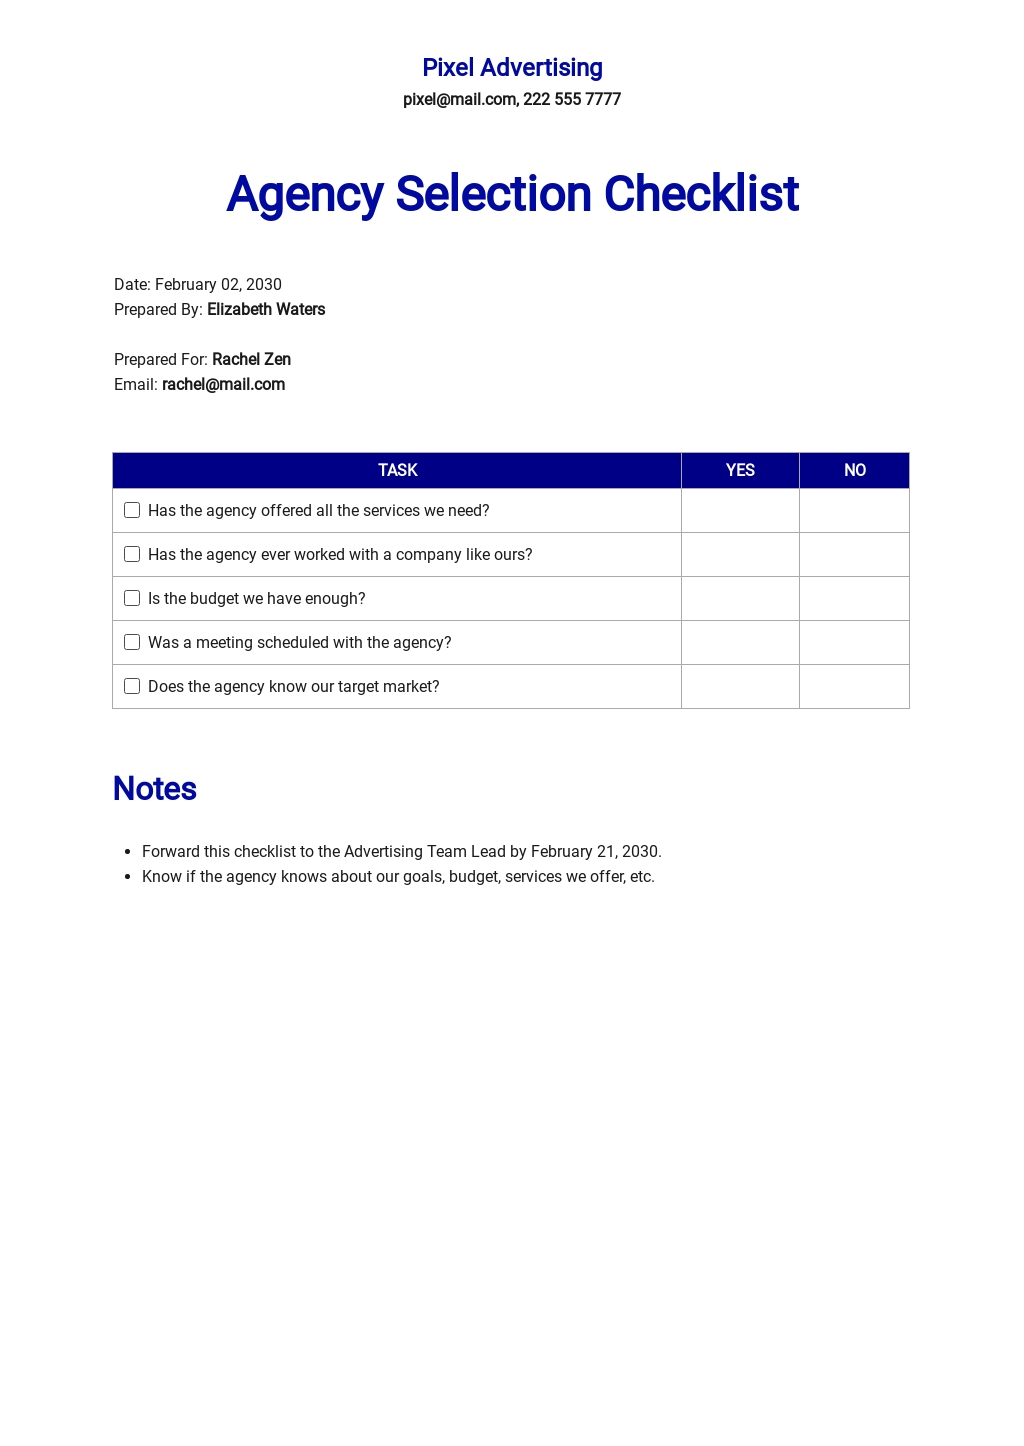 Advertising Agency Selection Checklist Template.jpe